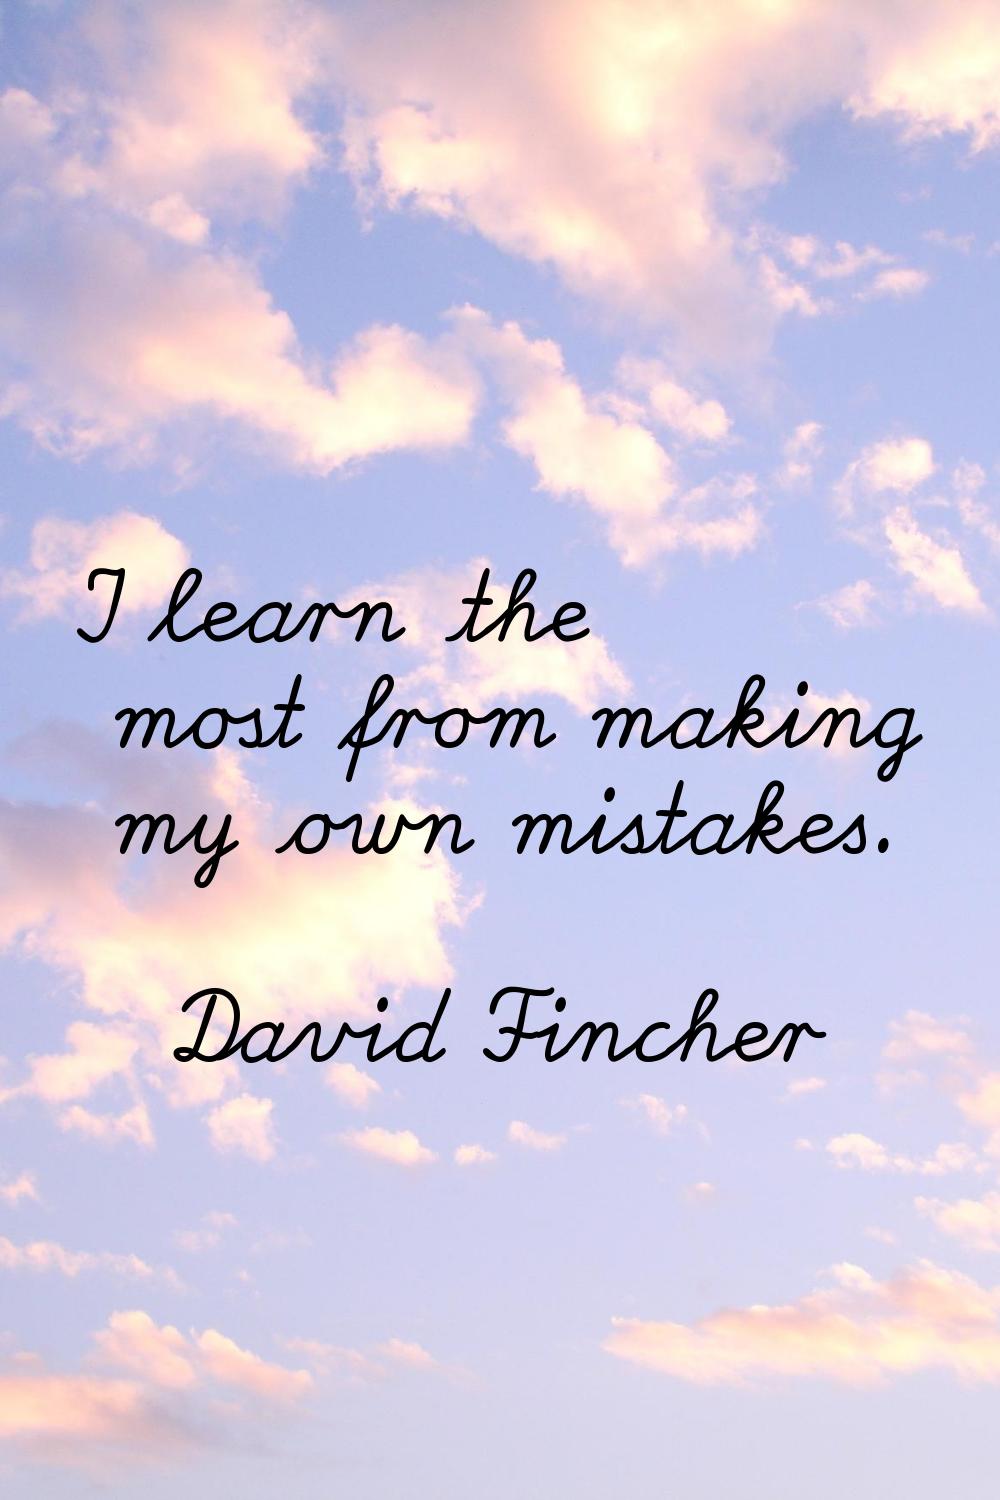 I learn the most from making my own mistakes.